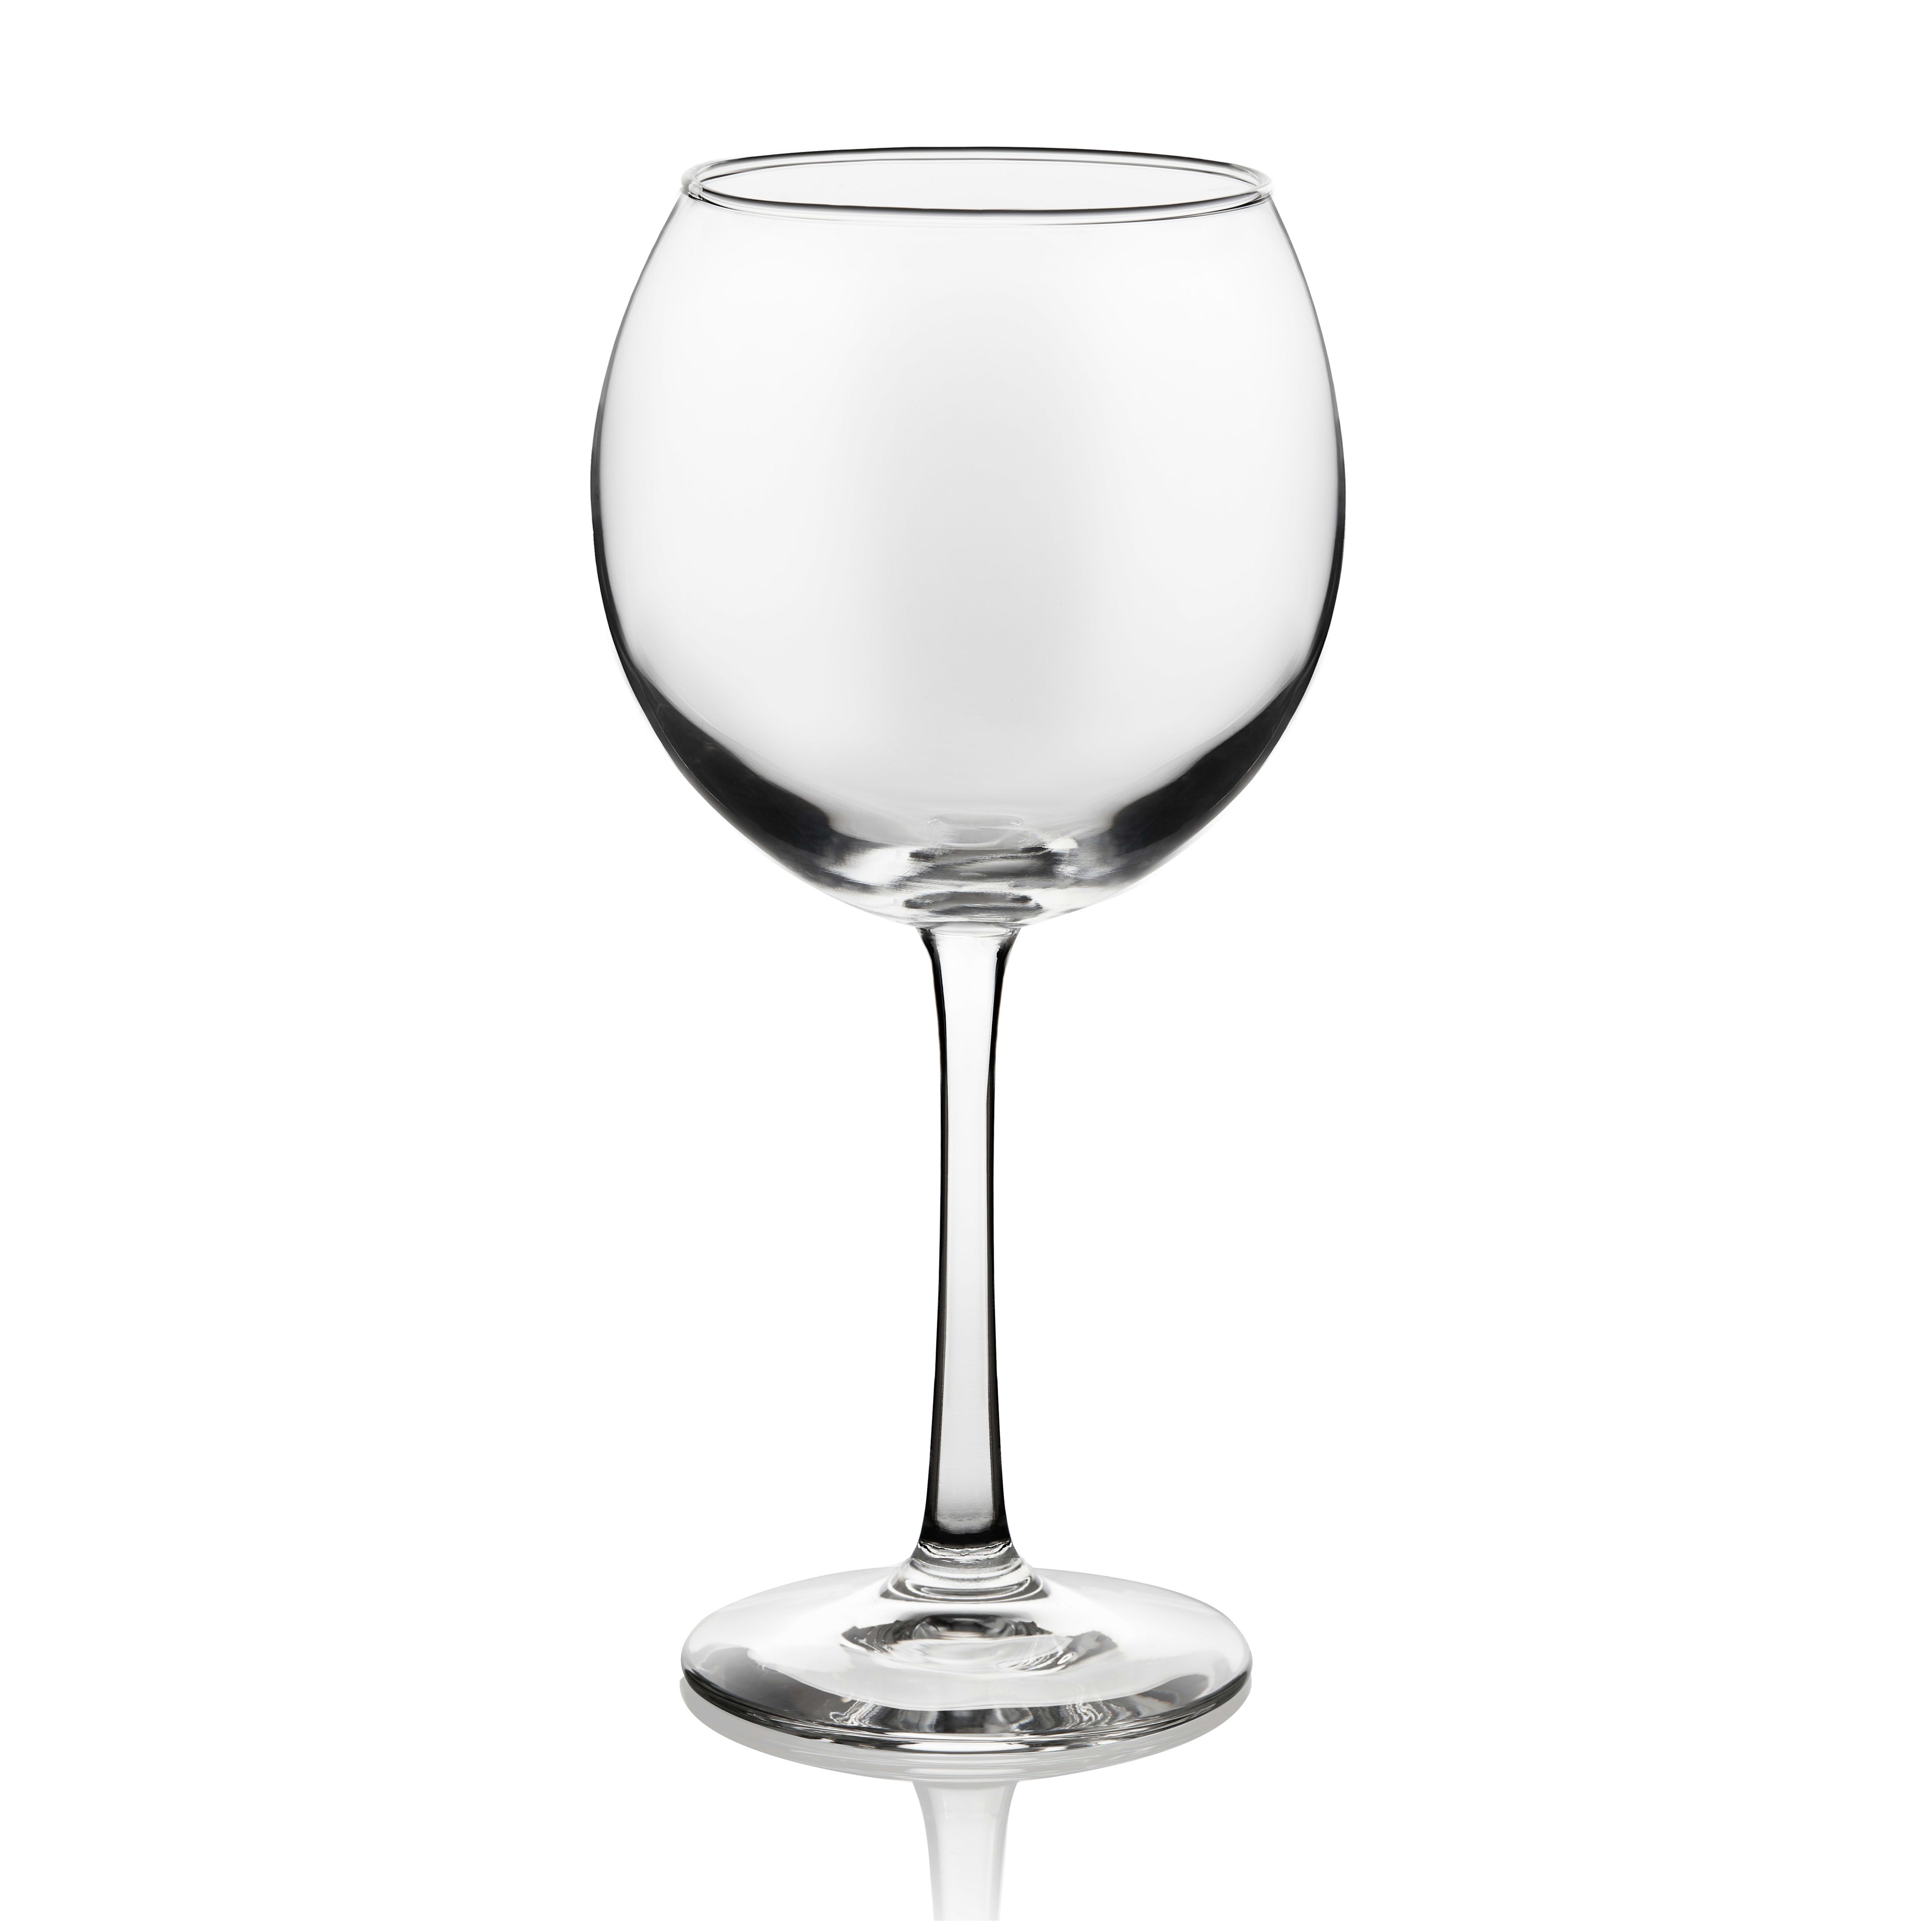 Libbey Midtown Red Wine Glasses, 18.25-ounce, Set of 8 - image 3 of 3